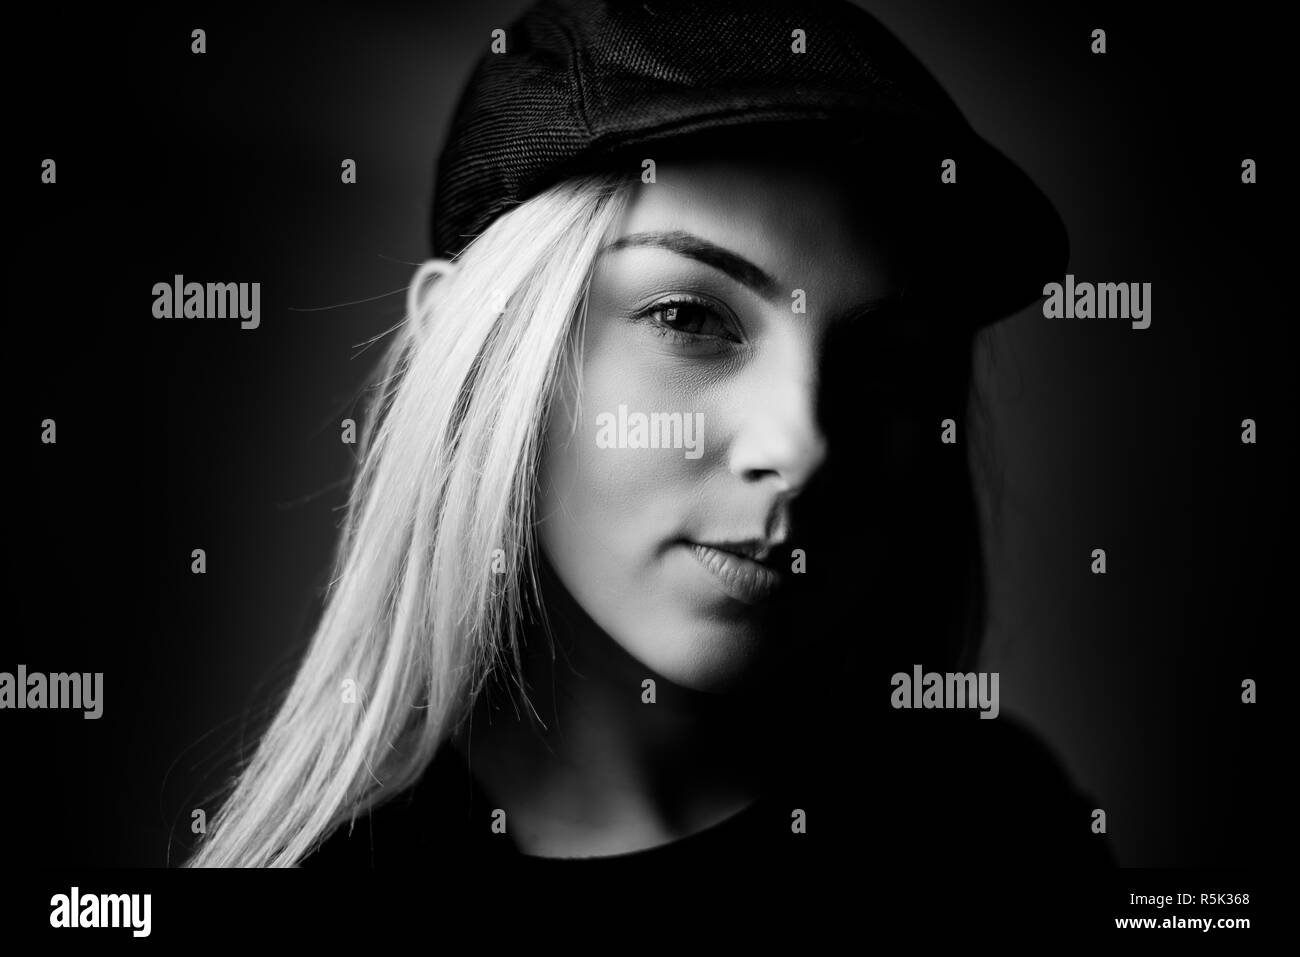 Portrait of a young adult, blonde woman Stock Photo